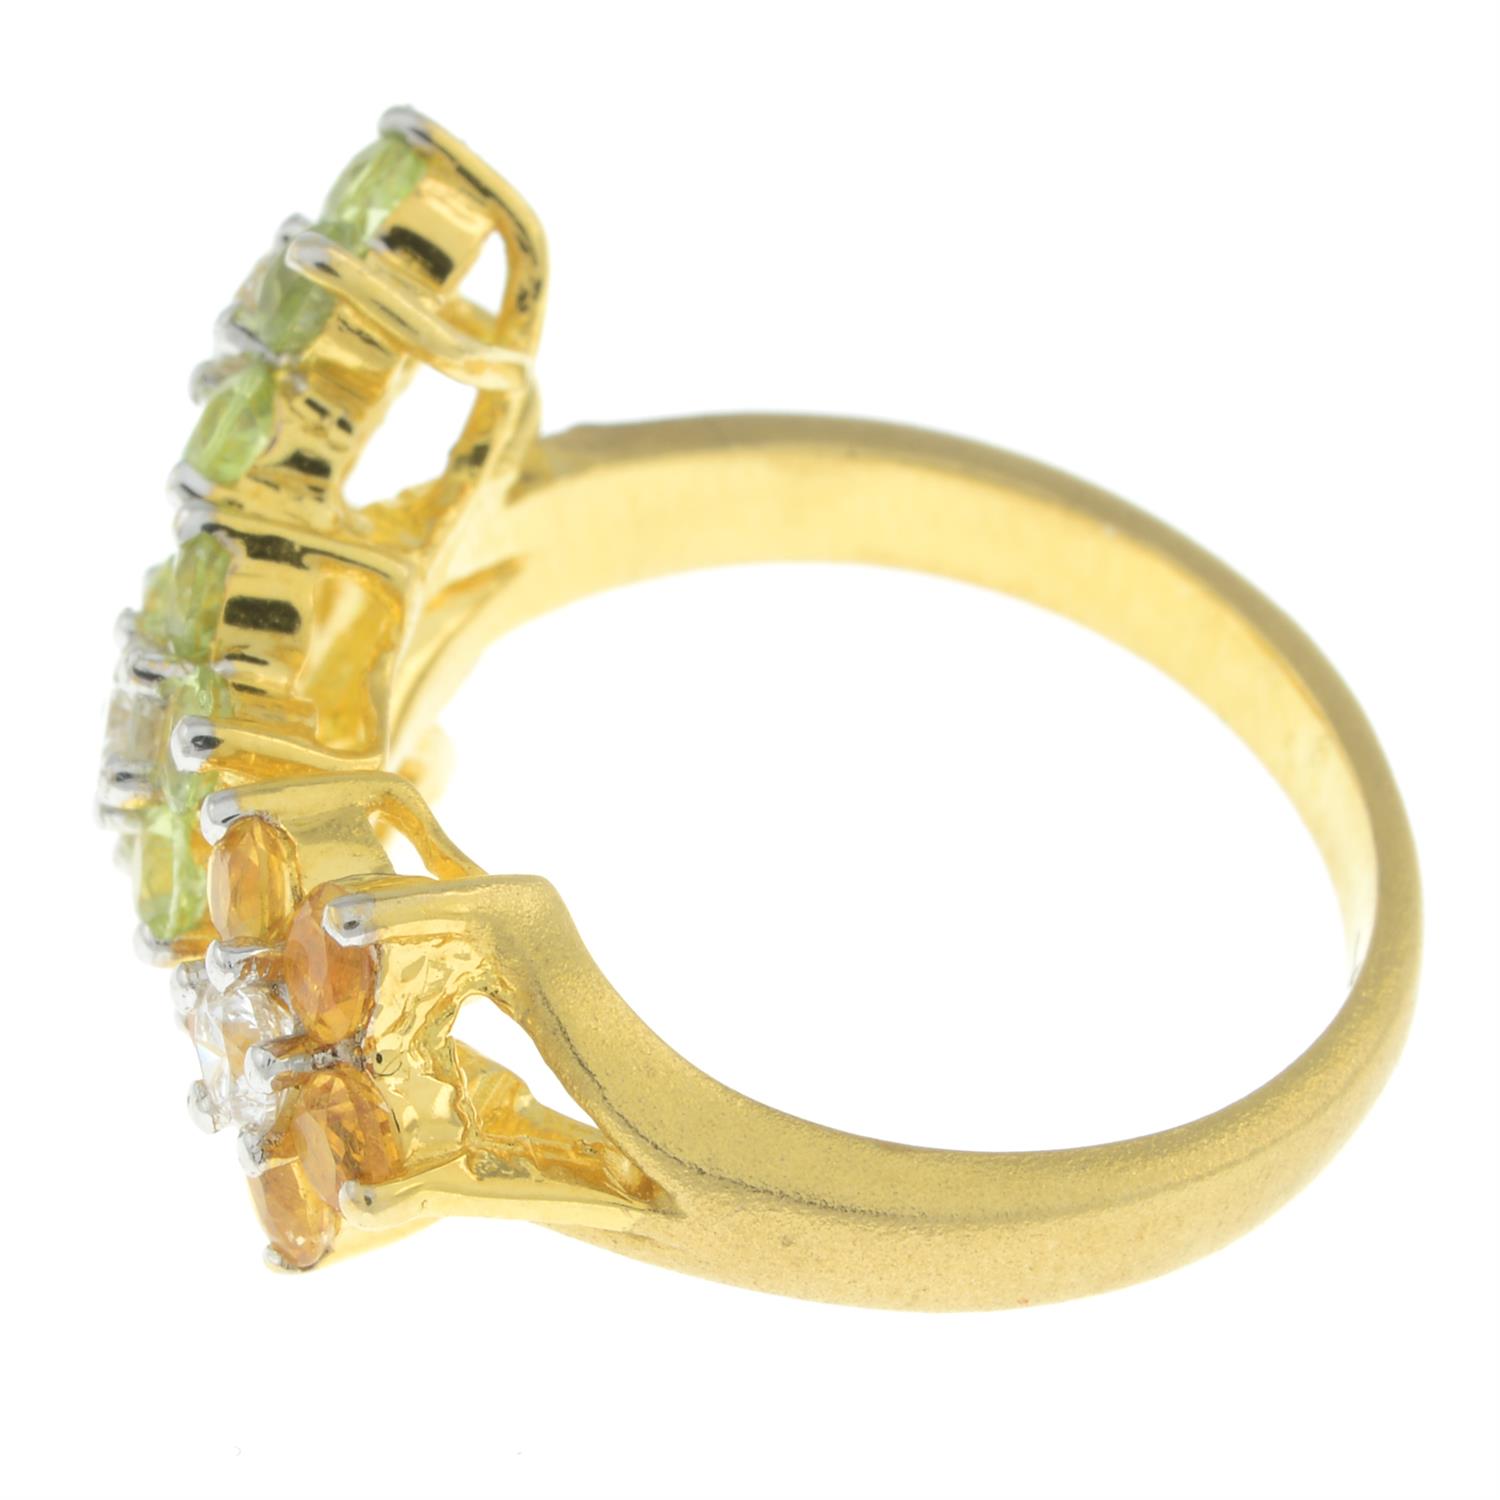 Diamond, peridot and citrine floral ring - Image 4 of 5